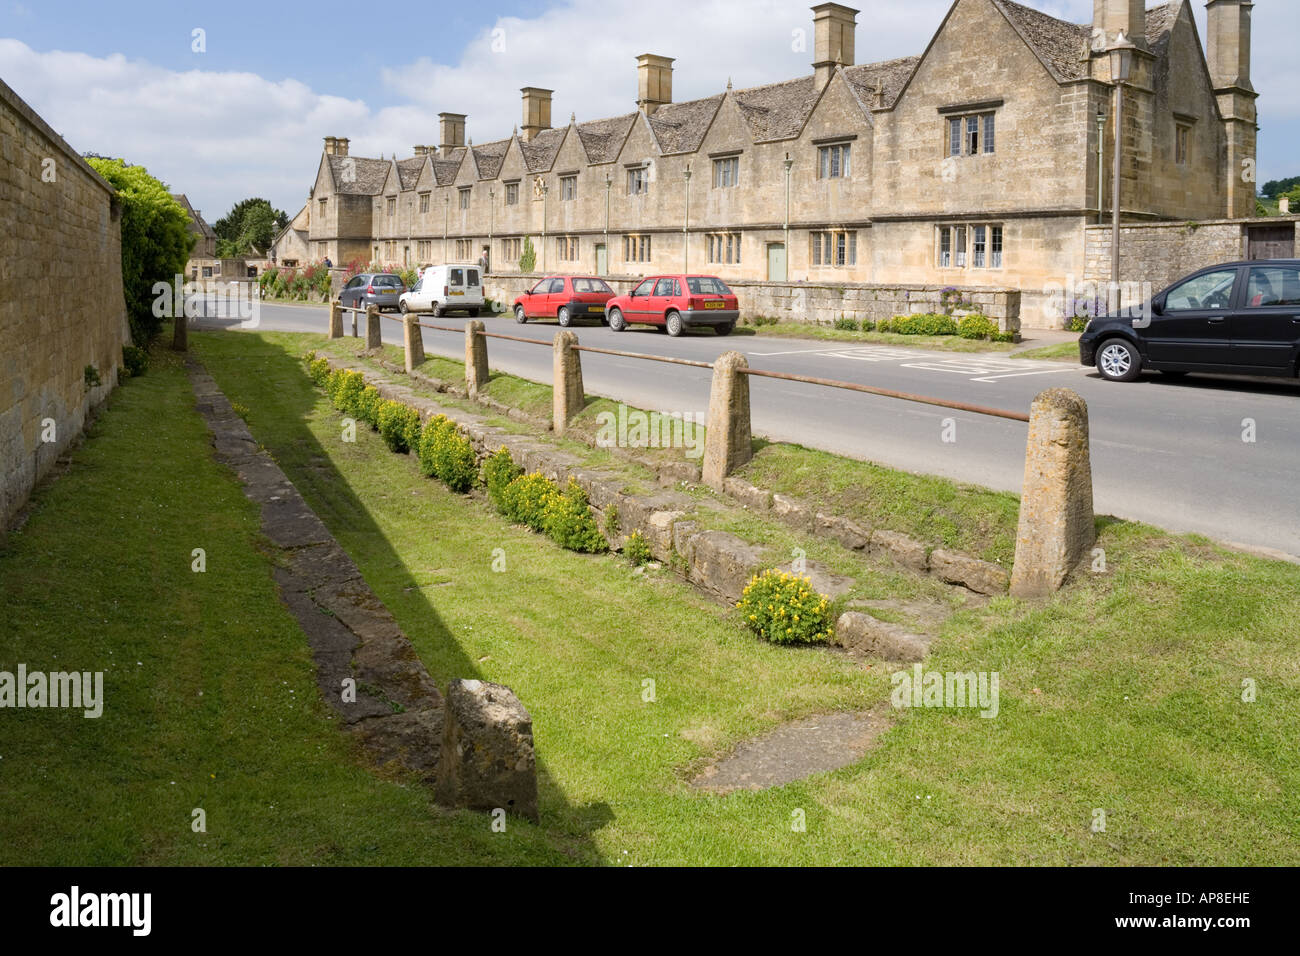 The cart dip for washing cart wheels opposite the almshouses in the Cotswold town of Chipping Campden, Gloucestershire Stock Photo